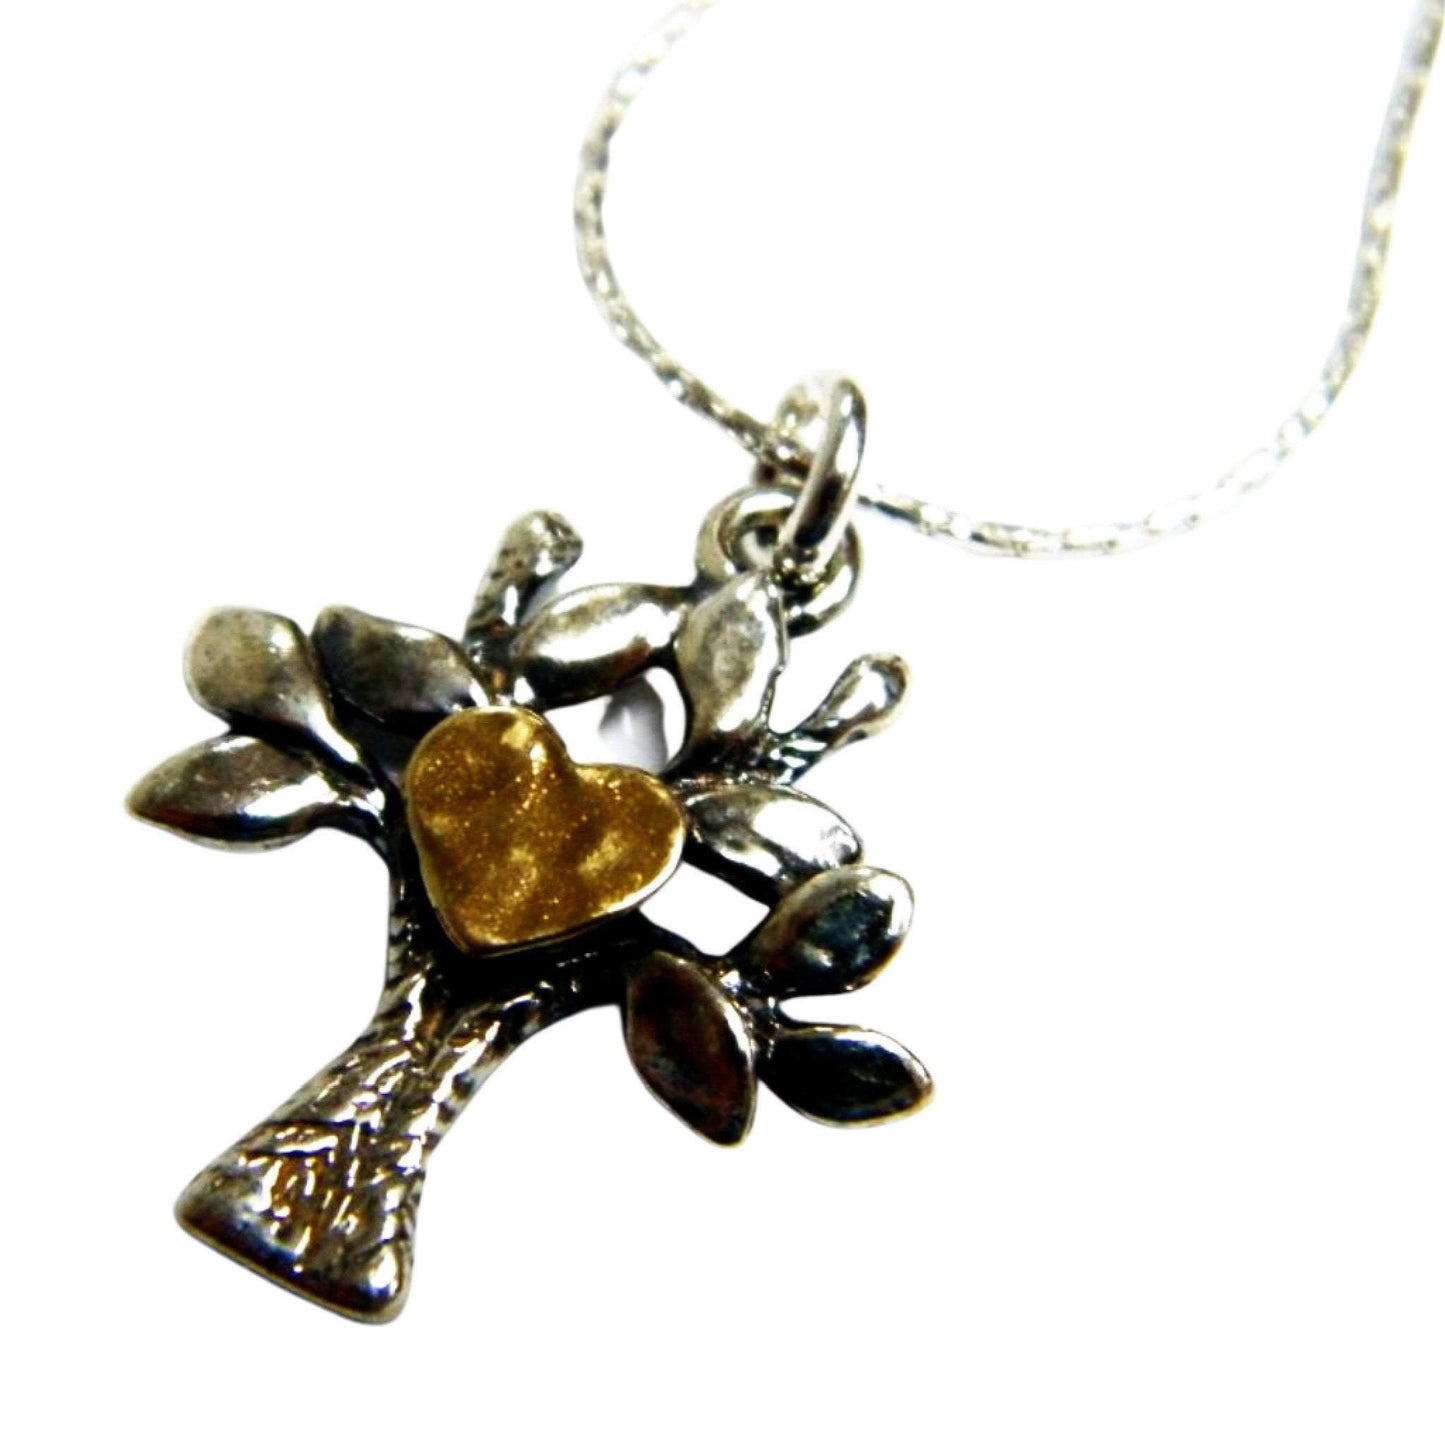 Bluenoemi Jewelry Necklaces silver & gold Bluenoemi Israeli jewelry Tree of life sterling silver & gold Blessings Necklace for Woman.